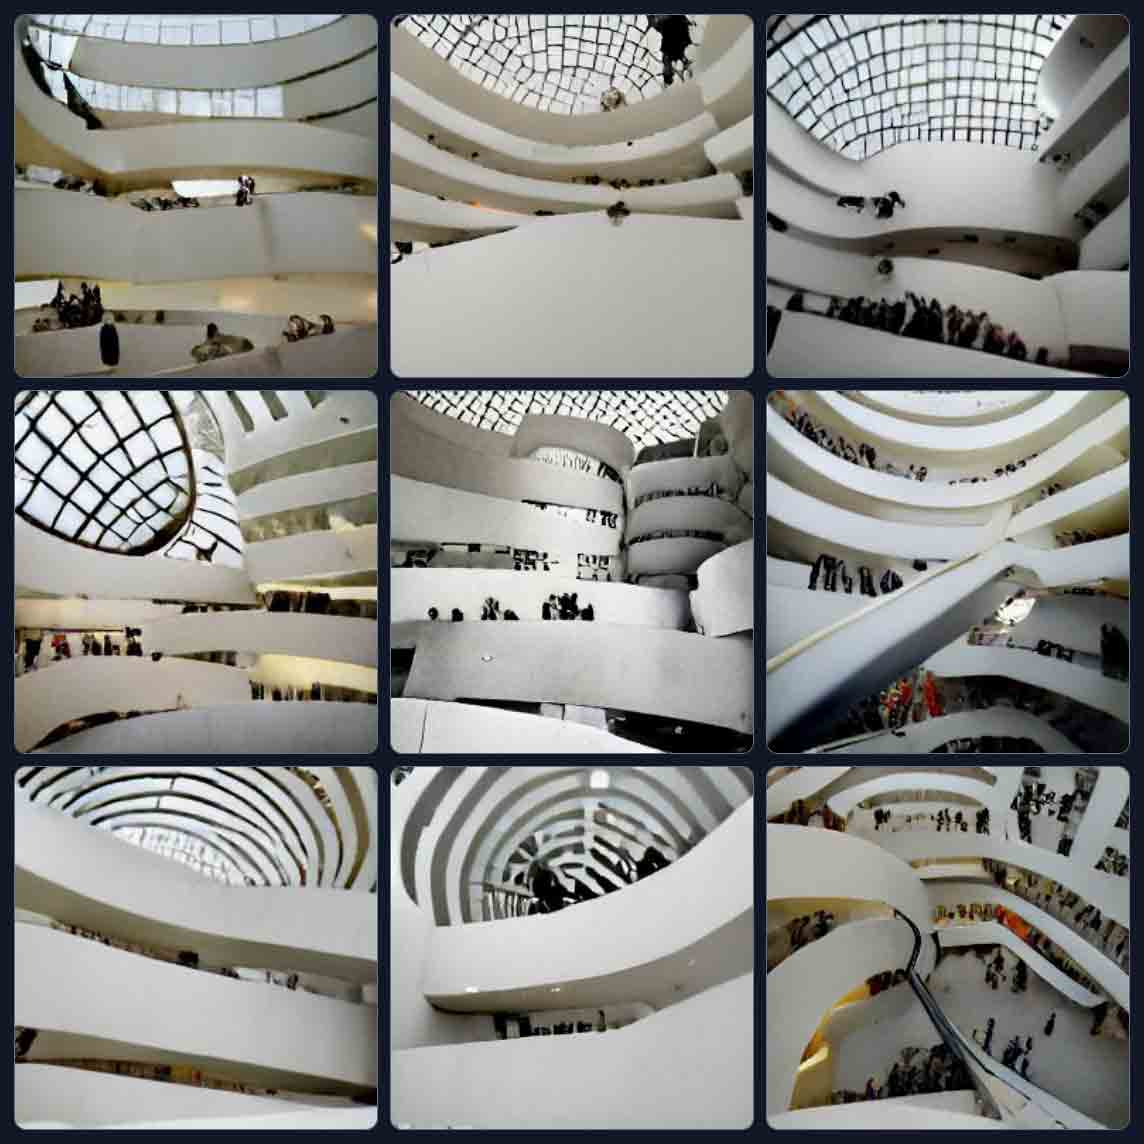 9 distorted photo-realistic views showing the sweeping curved white concrete levels of the Guggenheim from the multi-story atrium, most of them showing the multi-paned skylight, and a couple showing a seemingly descending spiral of levels. One has what may be an escalator coming from the middle level, and another shows the levels turning back in on each other almost to form a knot.